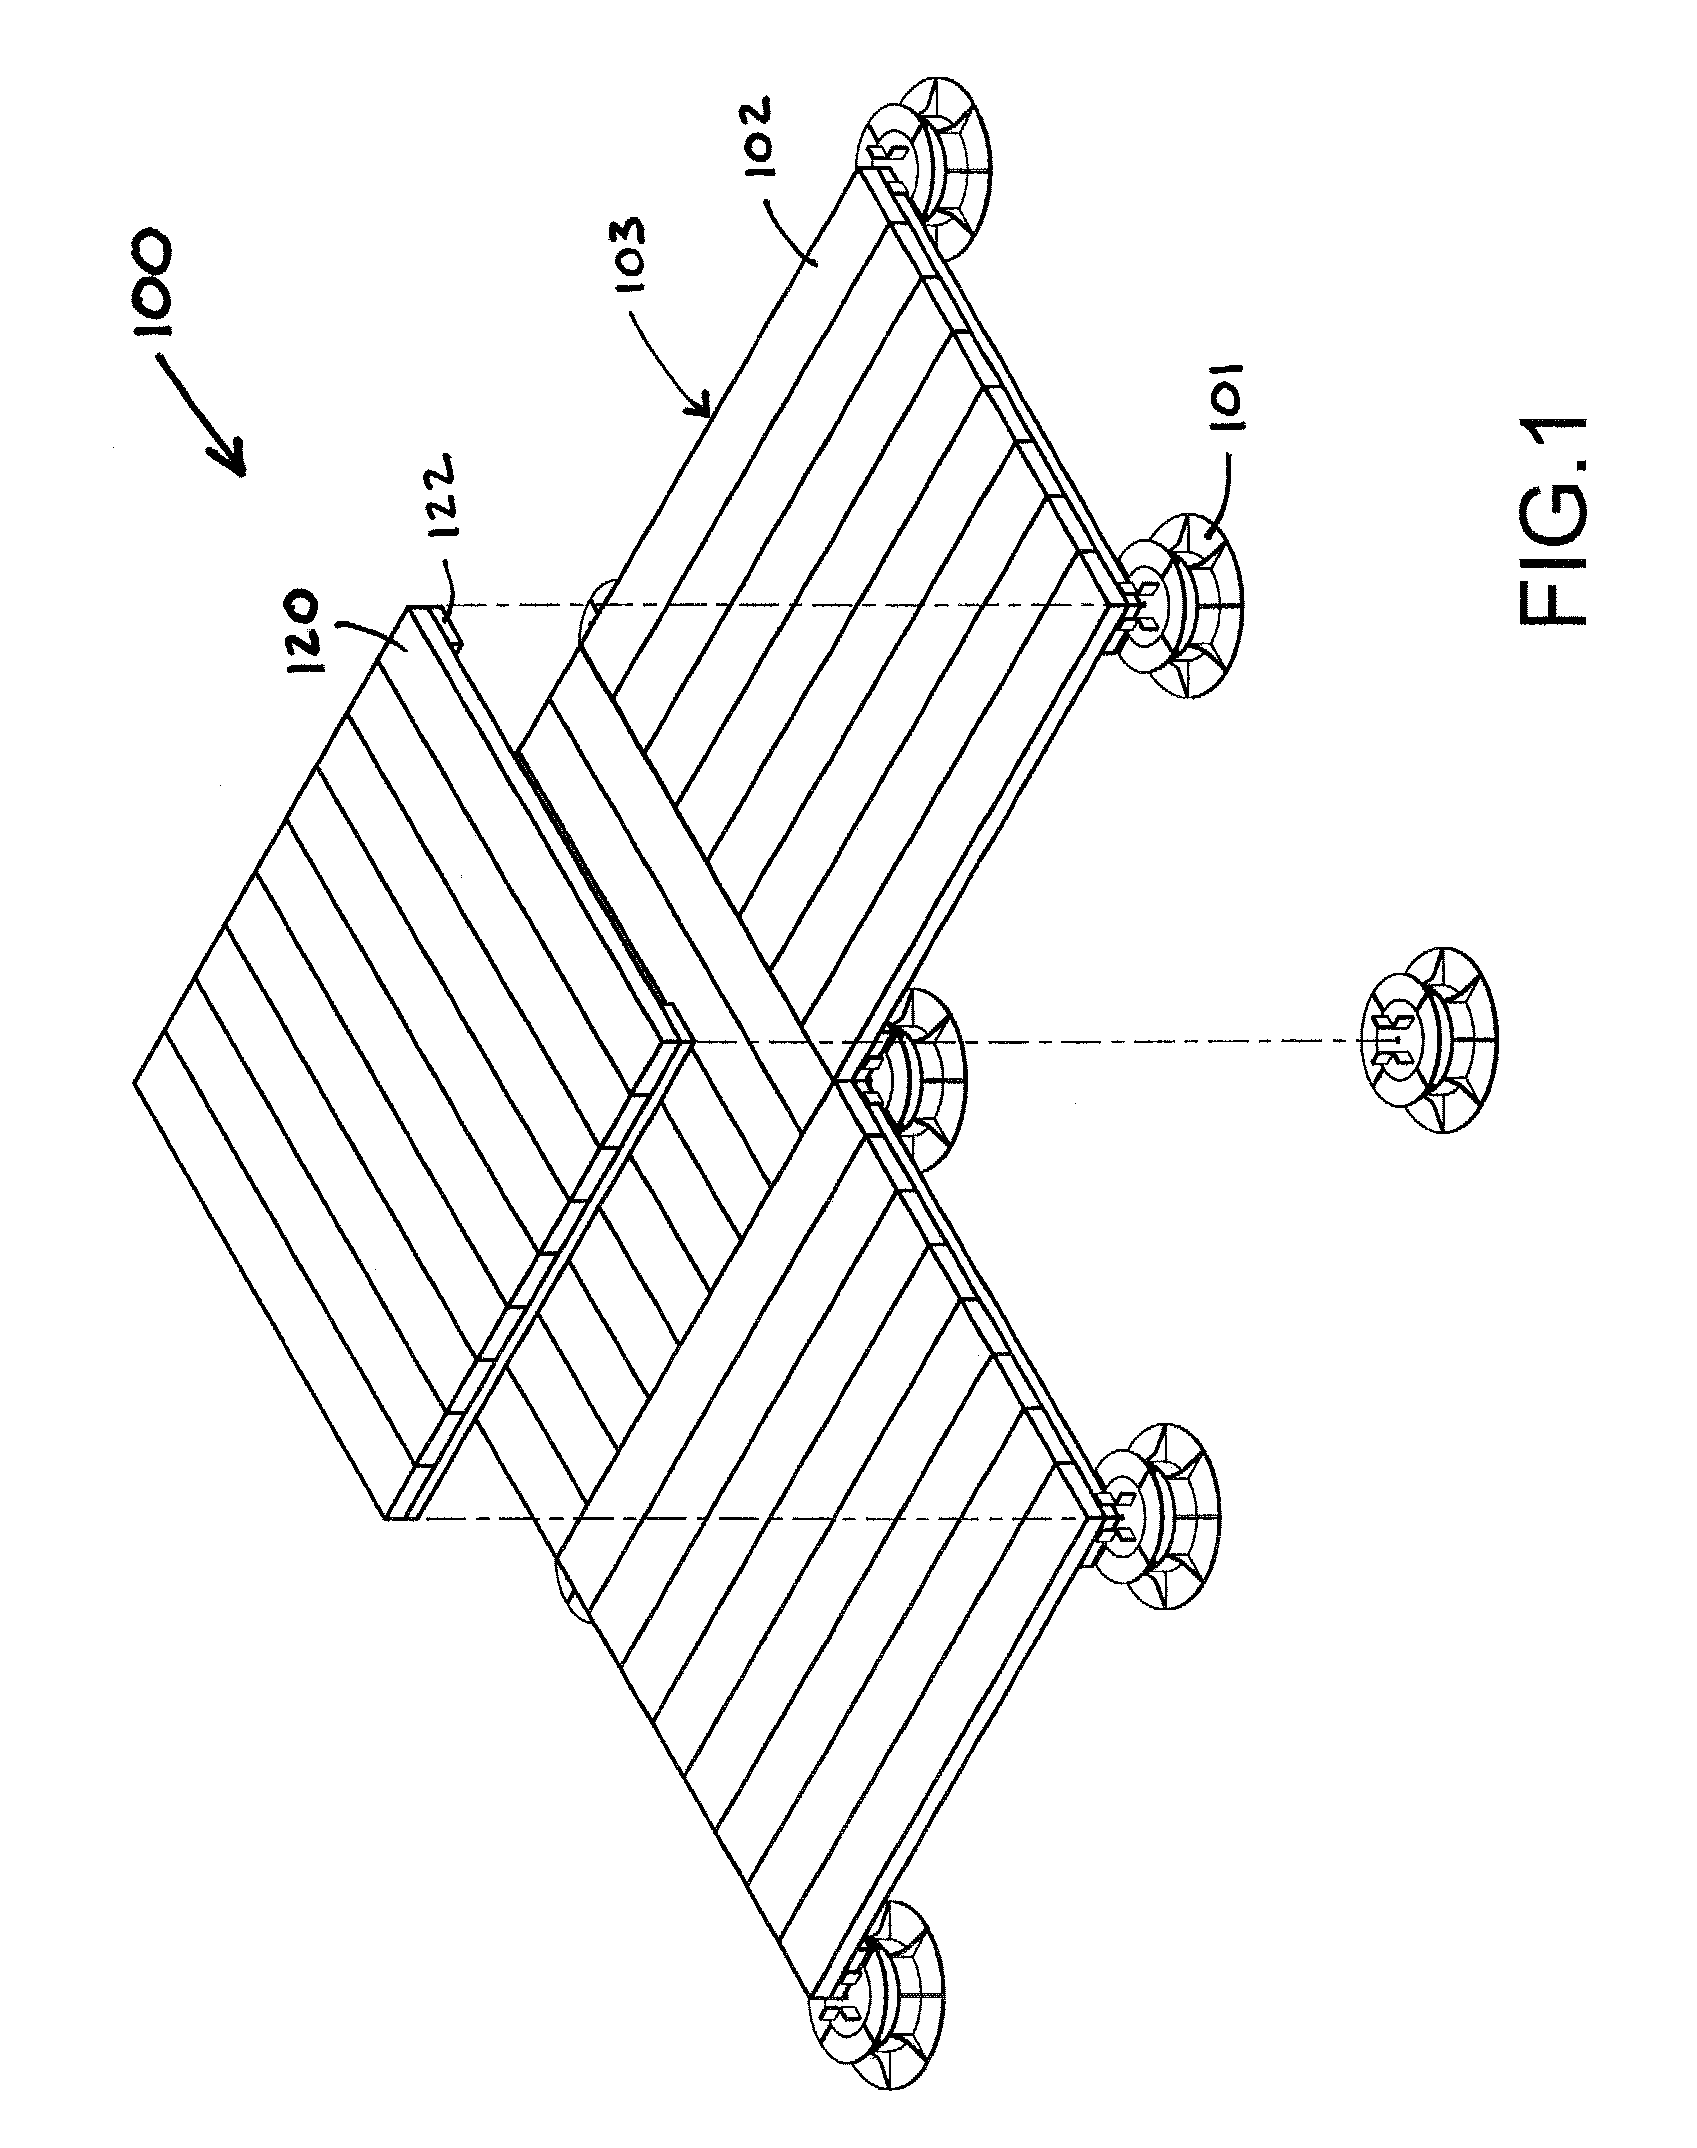 Support pedestal having an anchoring washer for securing elevated surface tiles